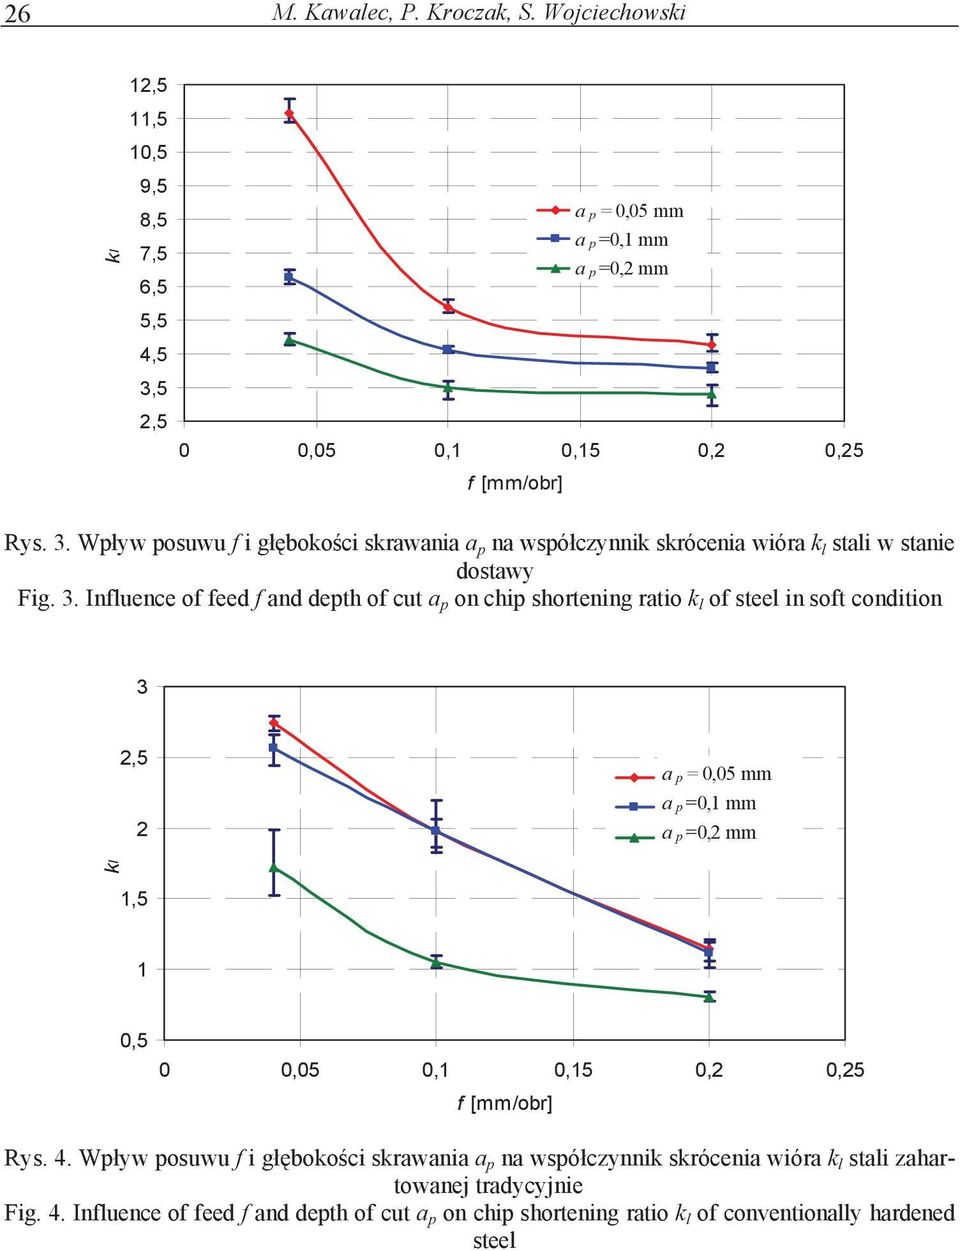 Influence of feed f and depth of cut a p on chip shortening ratio k l of steel in soft condition 3 2,5 2 ap=0,05mm a p ap=0,1mm a p ap=0,2mm a p kl 1,5 1 0,5 0 0,05 0,1 0,15